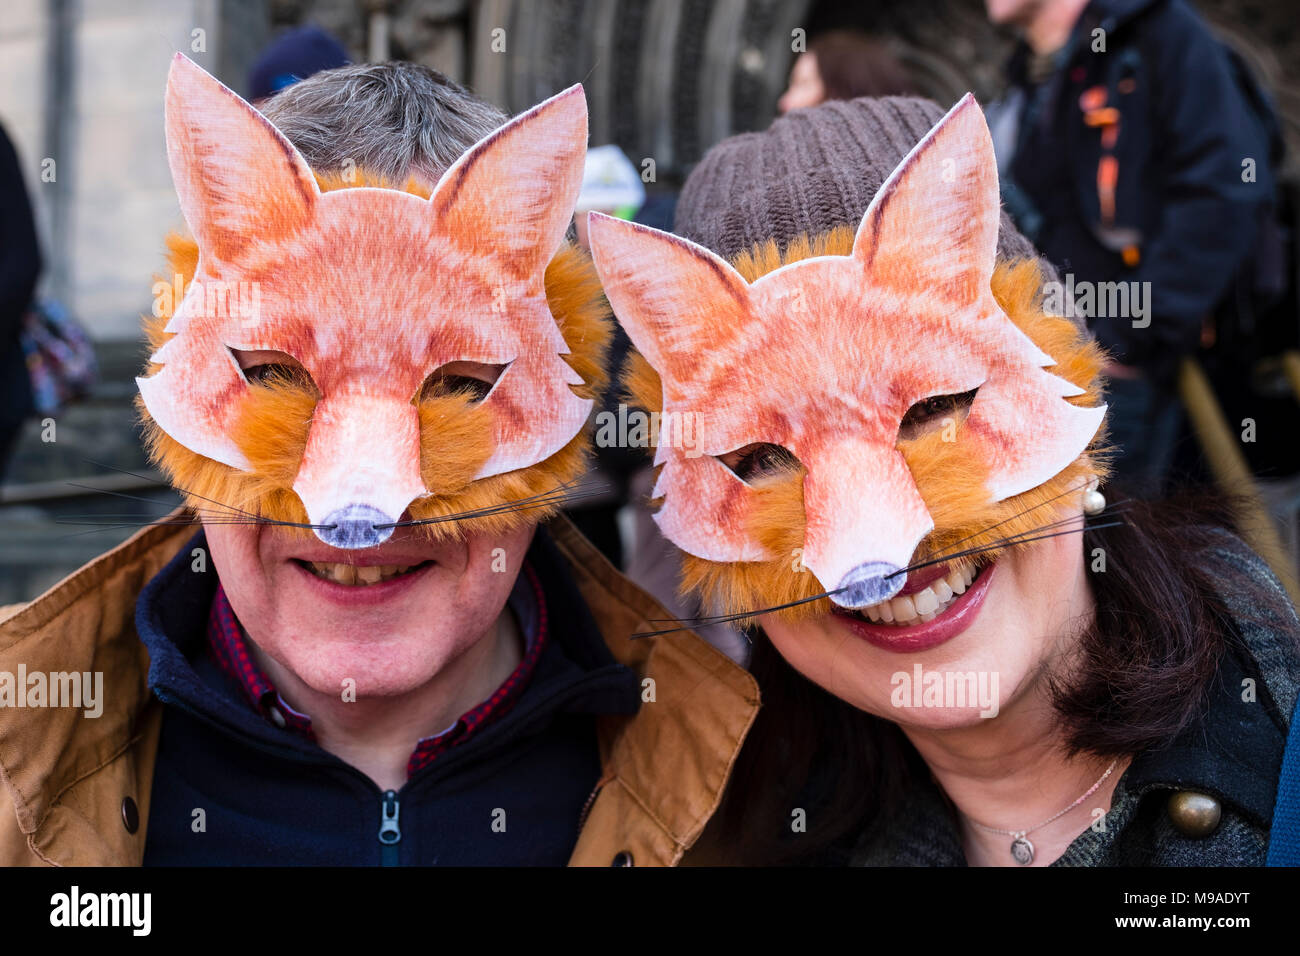 Edinburgh, Scotland,UK. 24 March 2018. For the Foxes March in Edinburgh City Centre. Protest march organised by groups such as League Against Cruel Sports and IFAW, to campaign for a ban on fox hunting in Scotland. Credit: Iain Masterton/Alamy Live News Stock Photo